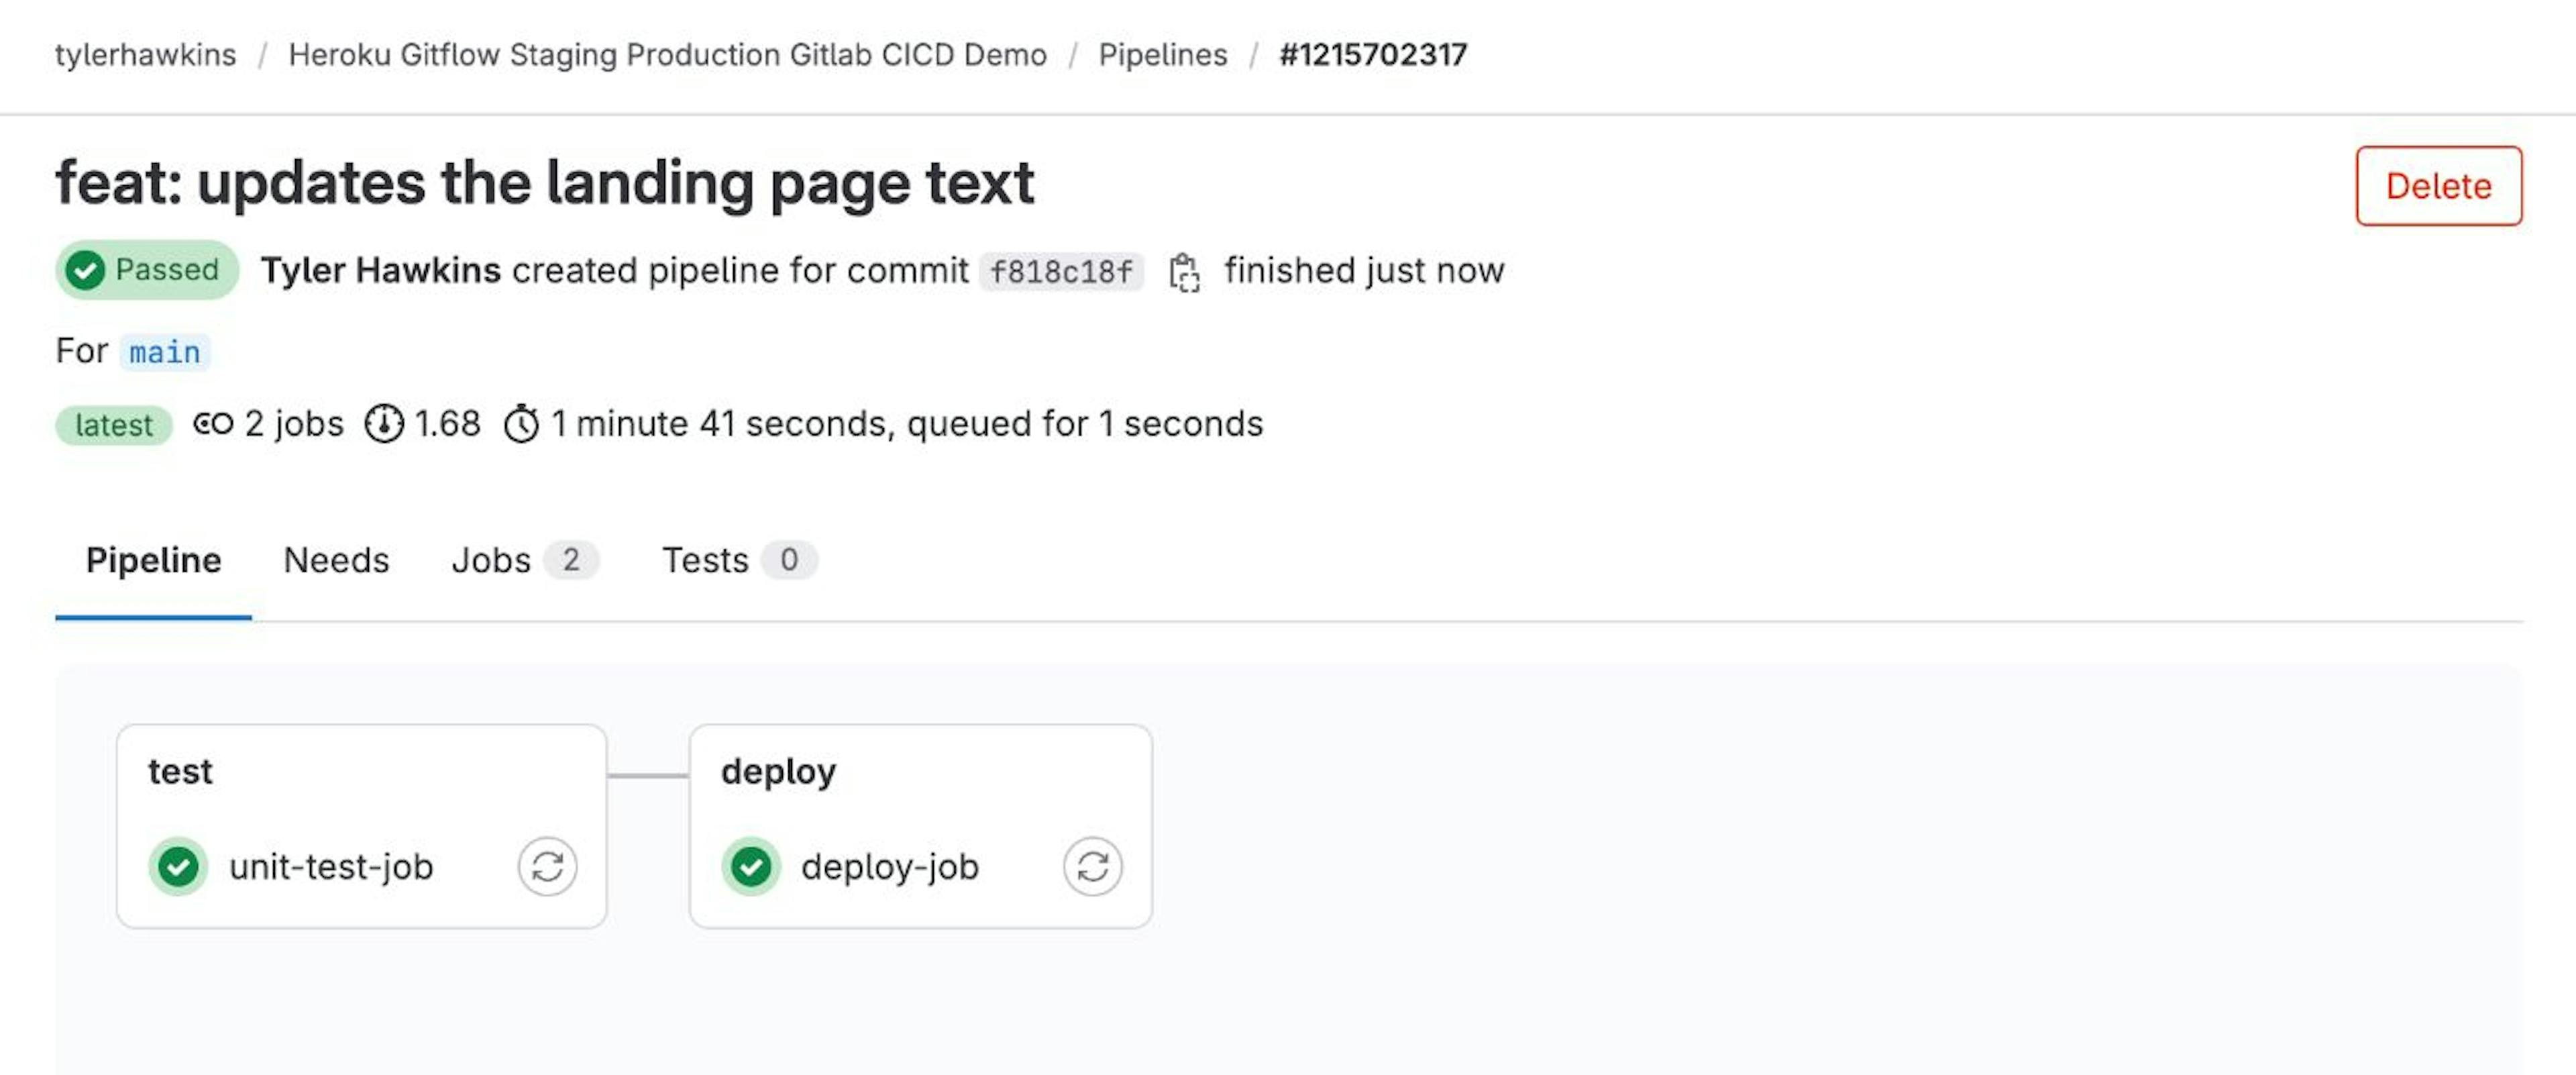 GitLab CI pipeline build for the main branch